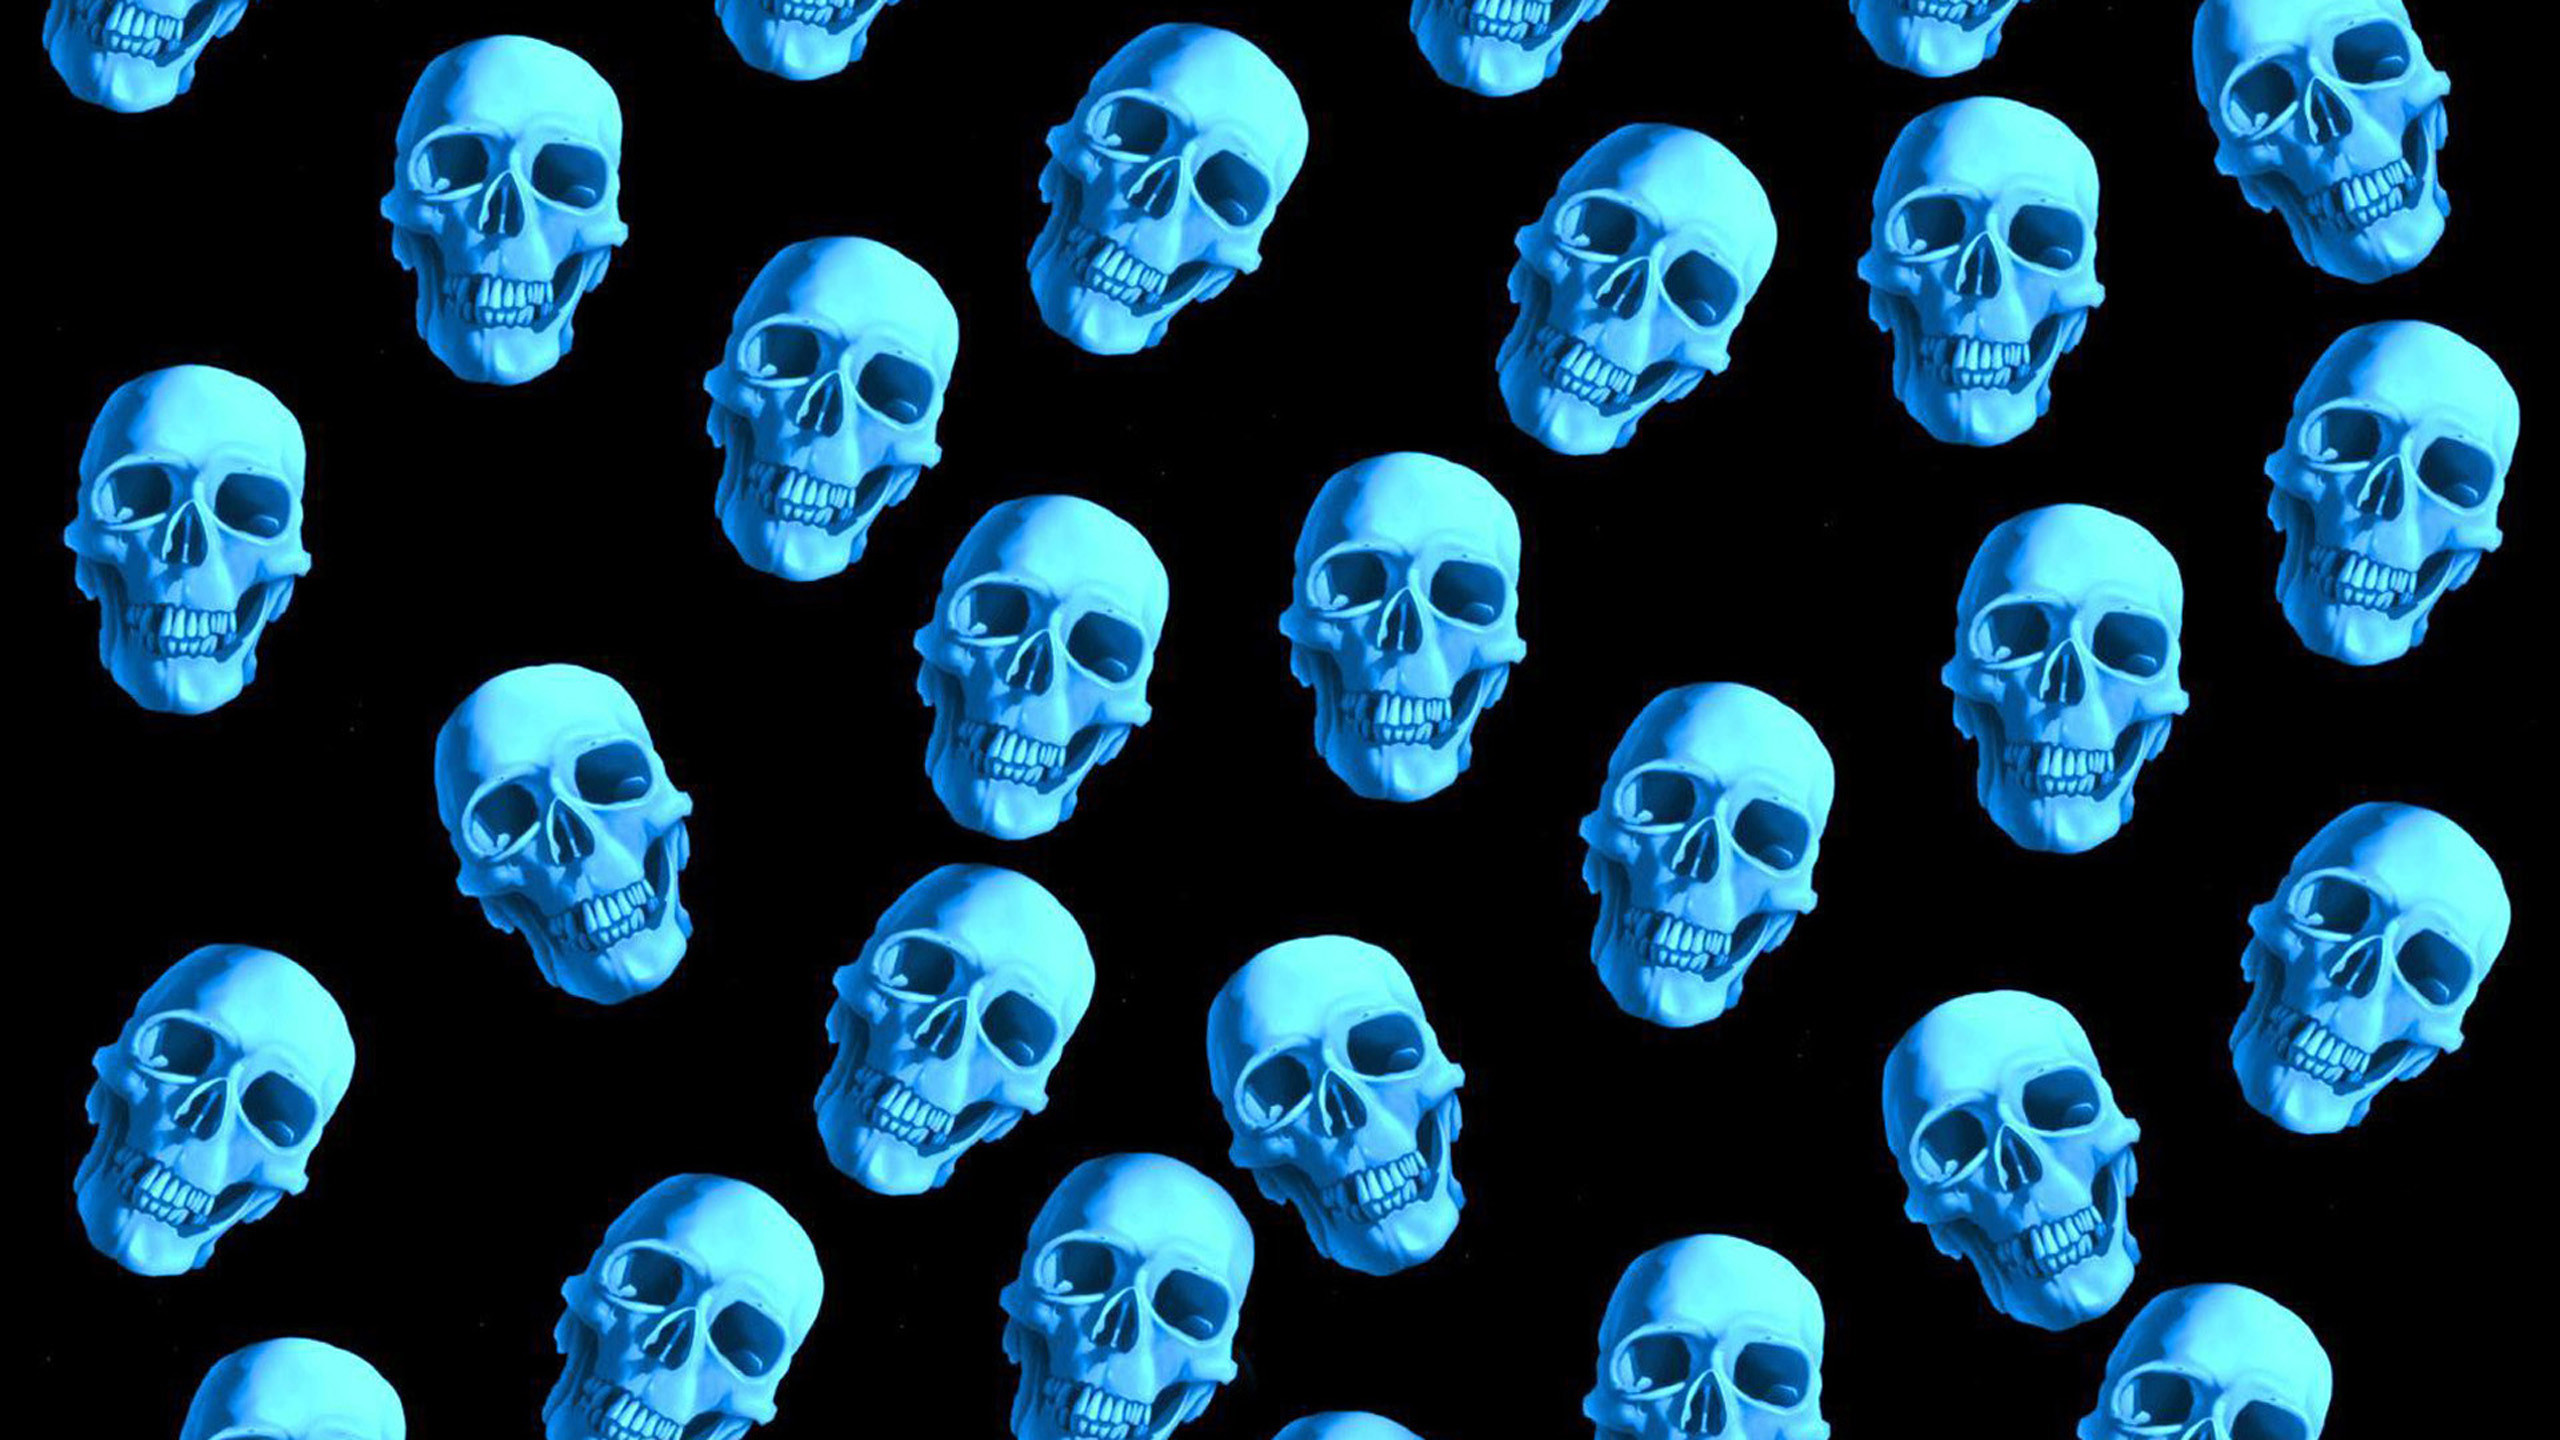 2560x1440 ... Skull Wallpapers For Android, 36 High Quality Skull Wallpapers .